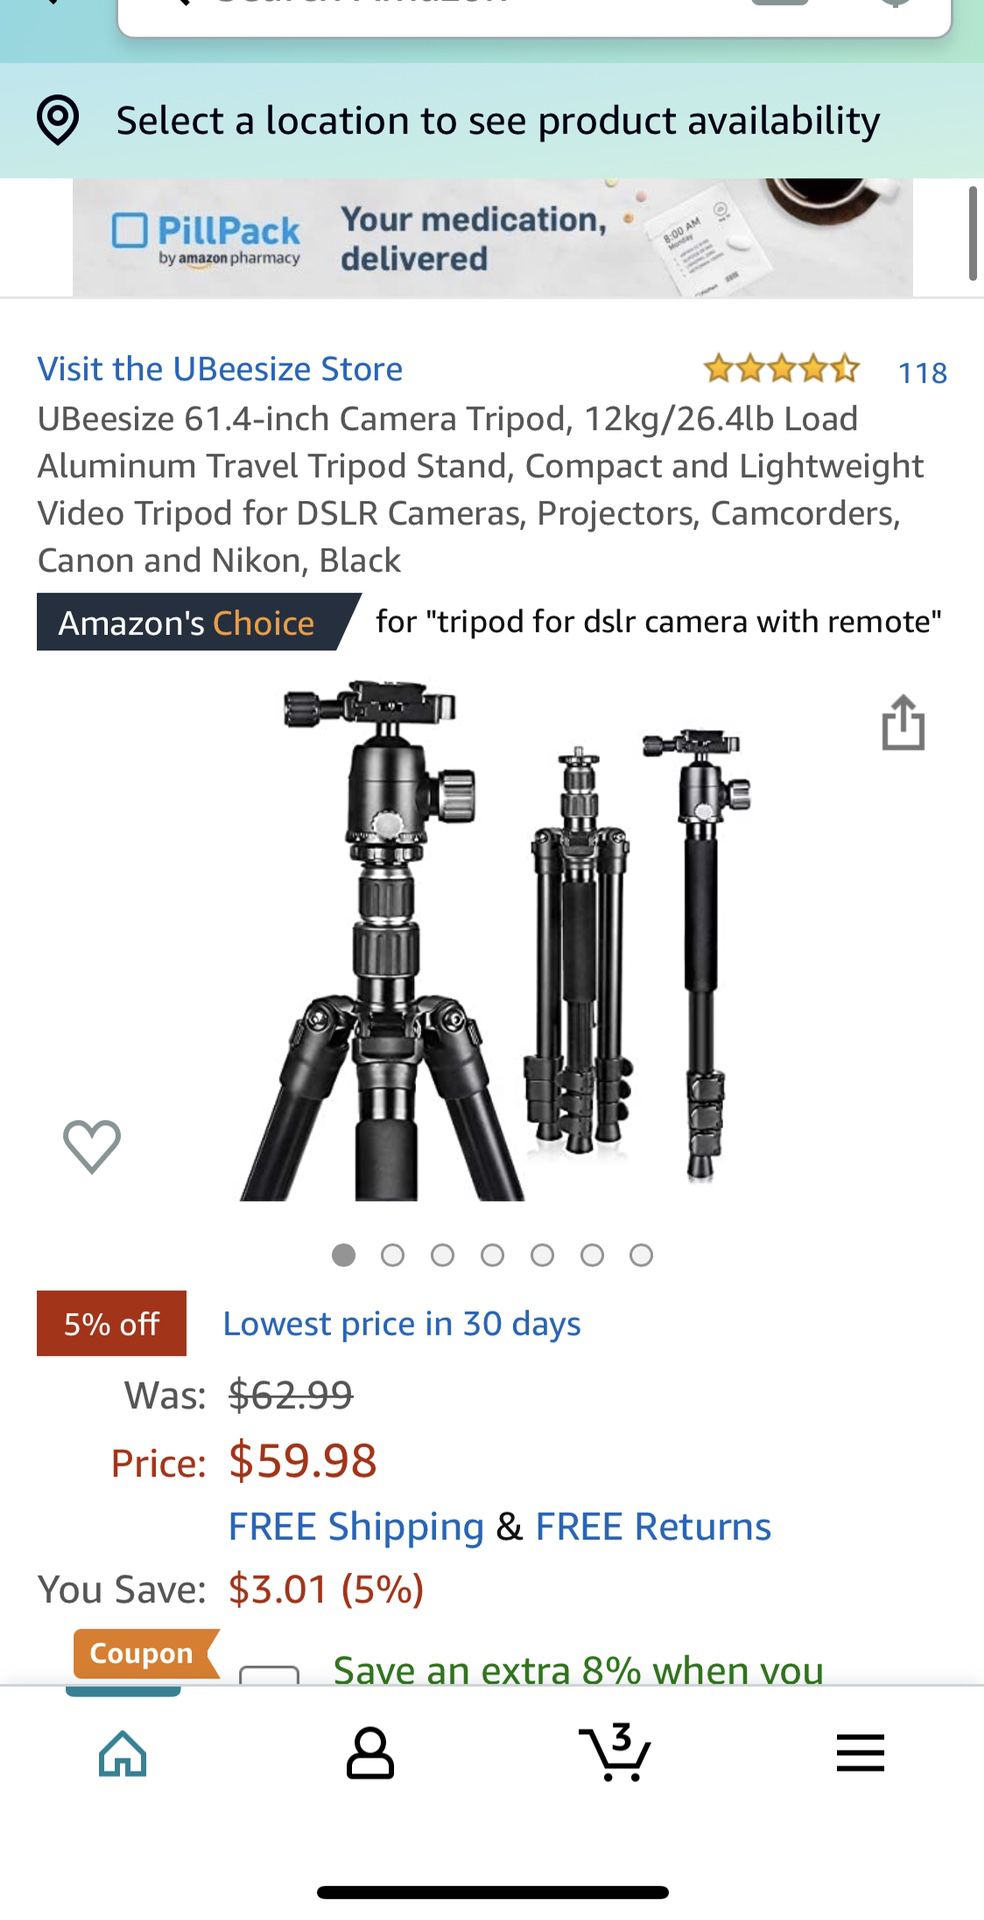 NEW! UBeesize 61.4-inch Camera Tripod, 12kg/26.4lb Load Aluminum Travel Tripod Stand, Compact and Lightweight Video Tripod for DSLR Cameras, Projecto